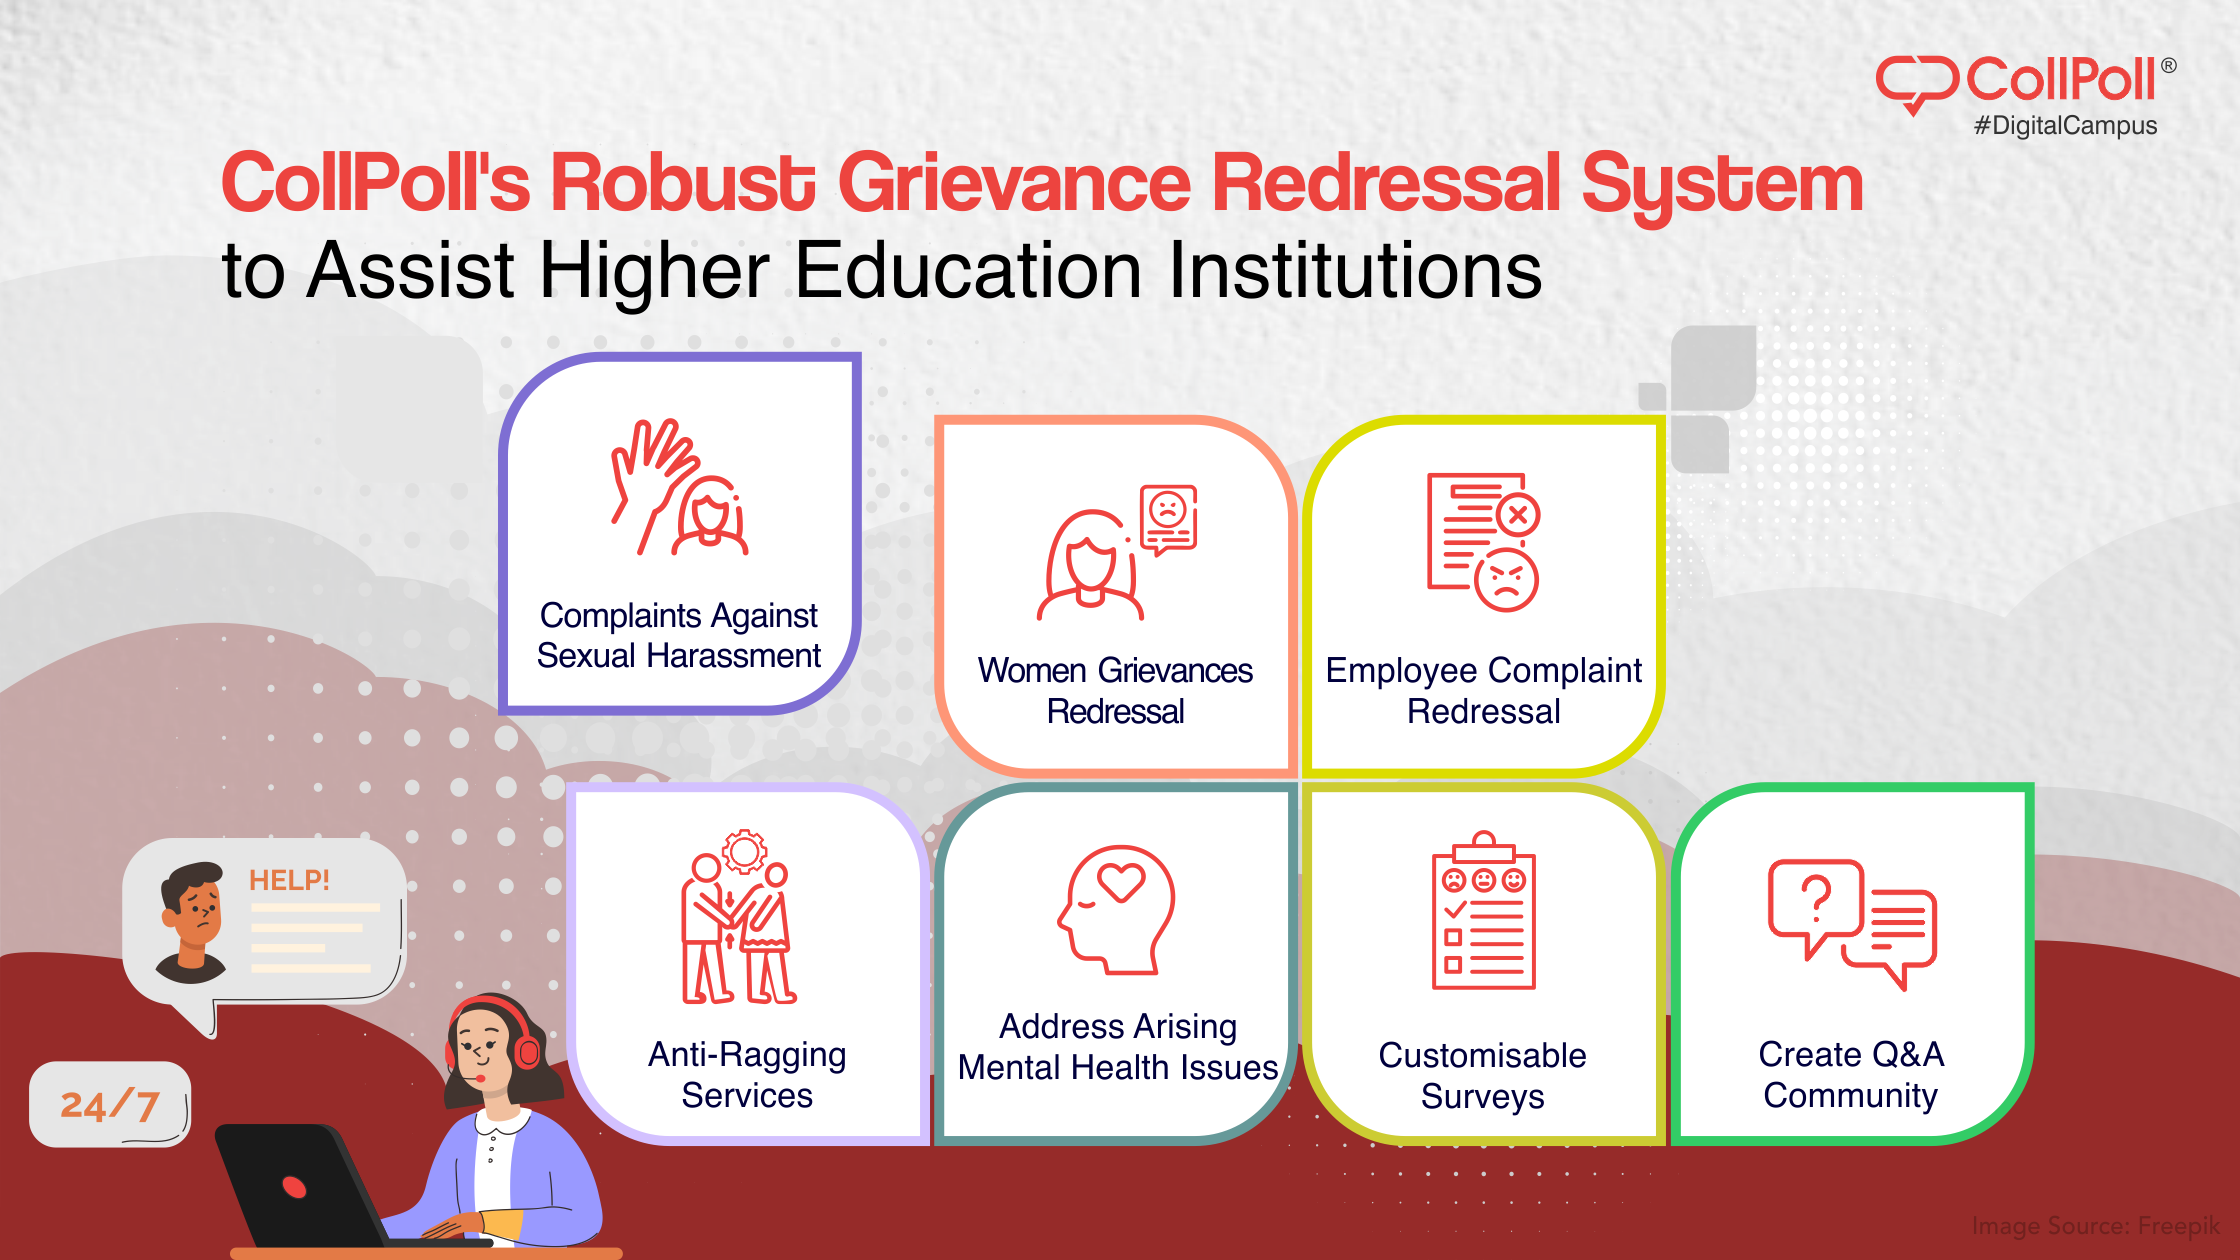 CollPoll's Robust Grievance Redressal System